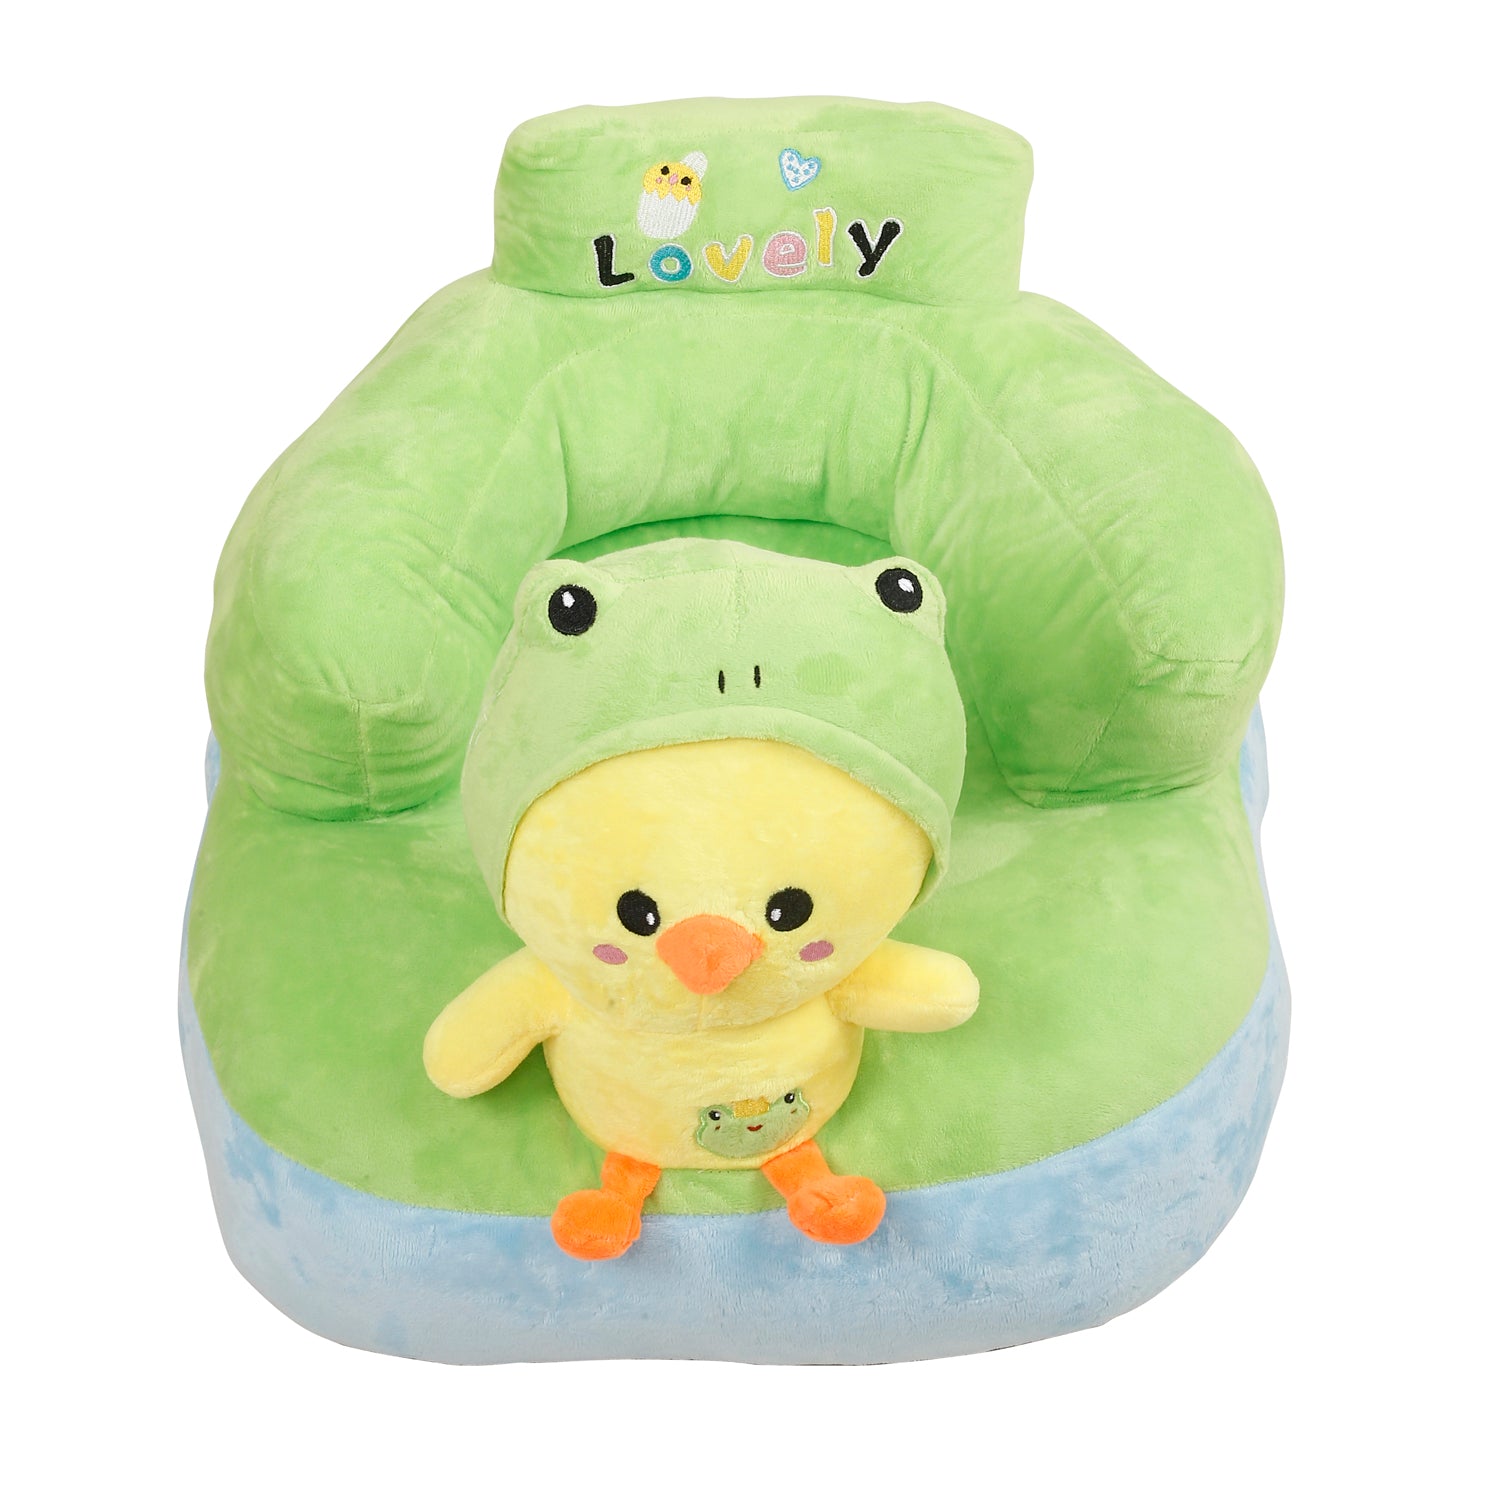 Relaxing With Duck Green Sofa - Baby Moo